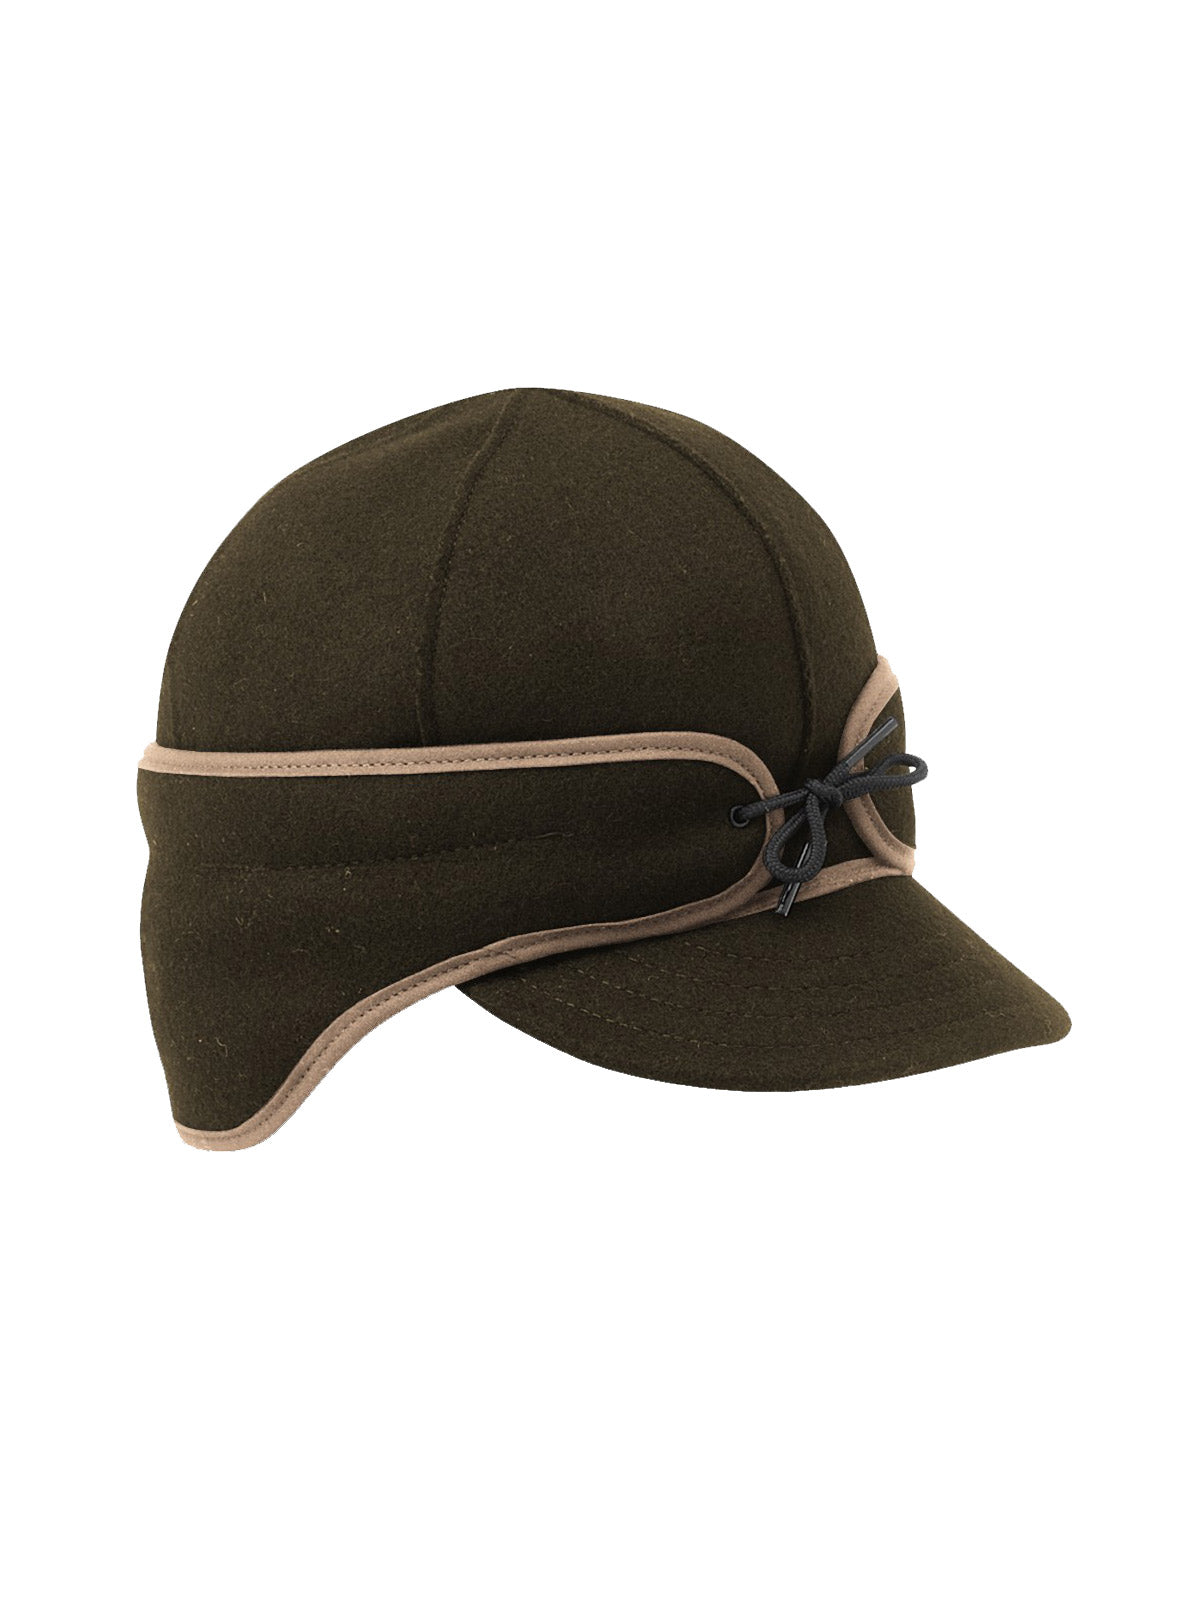 Stormy Kromer Rancher Caps With Ear Band in Olive - 50500-OLV